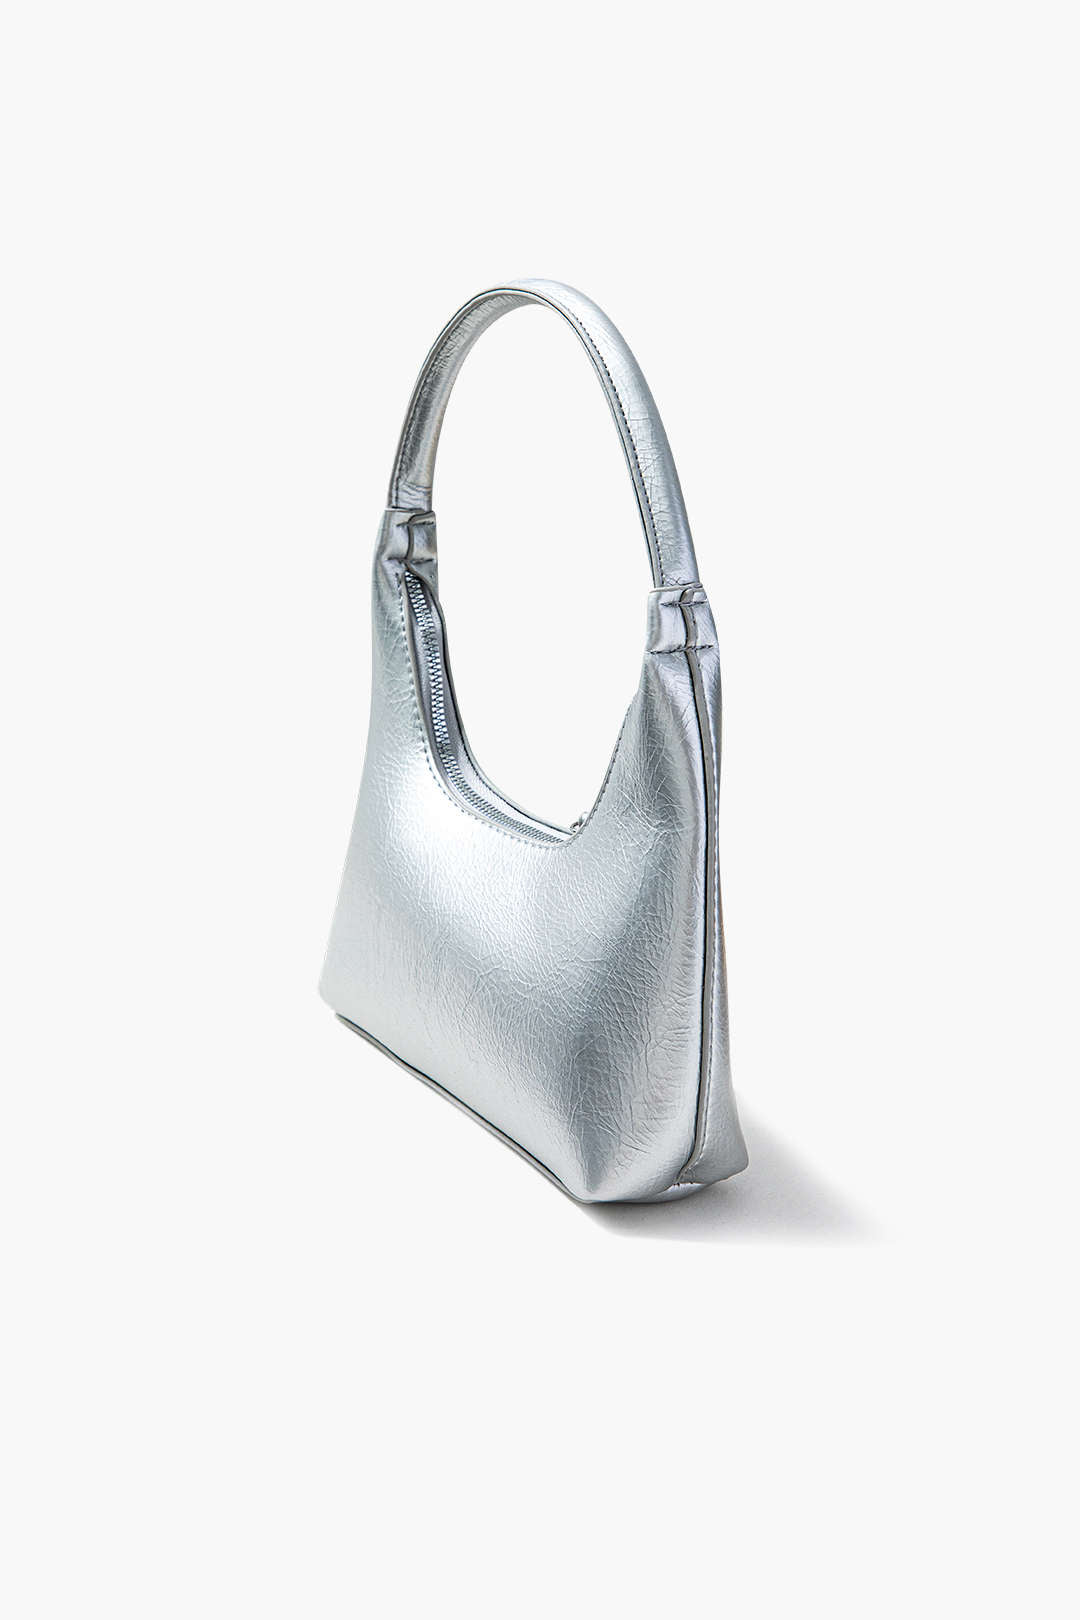 Textured Metallic Faux Leather Tote Bag